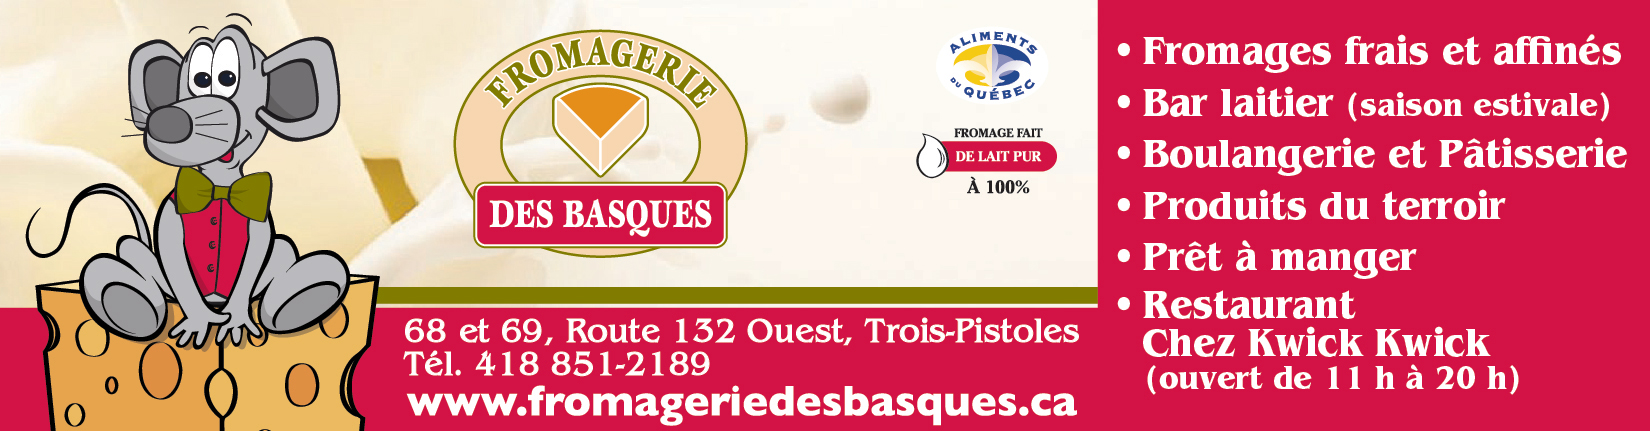 Fromagerie Basques 2018